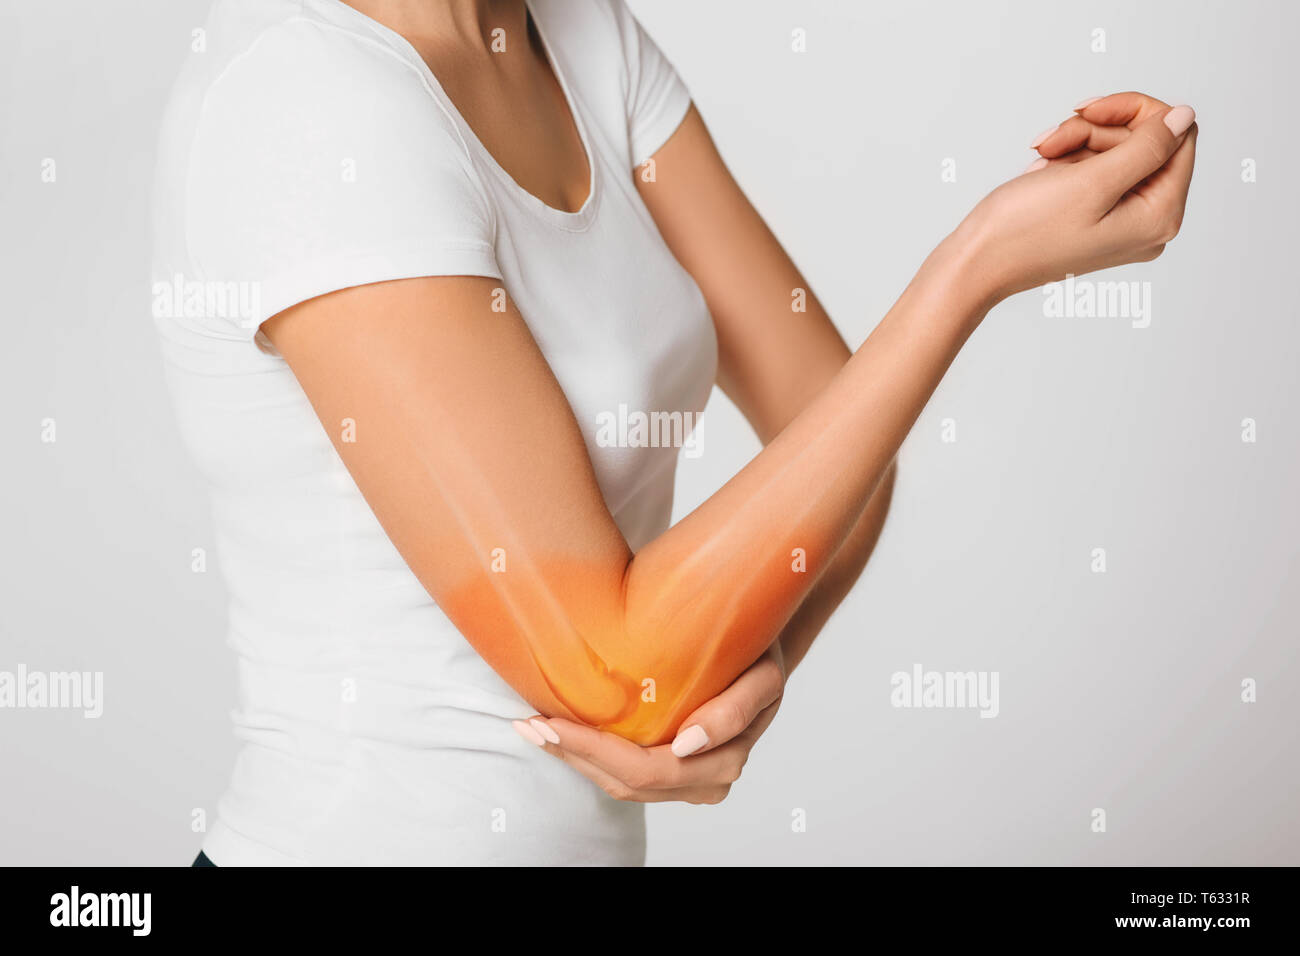 woman suffering pain in the elbow. Composite of image arm bones and elbow Stock Photo